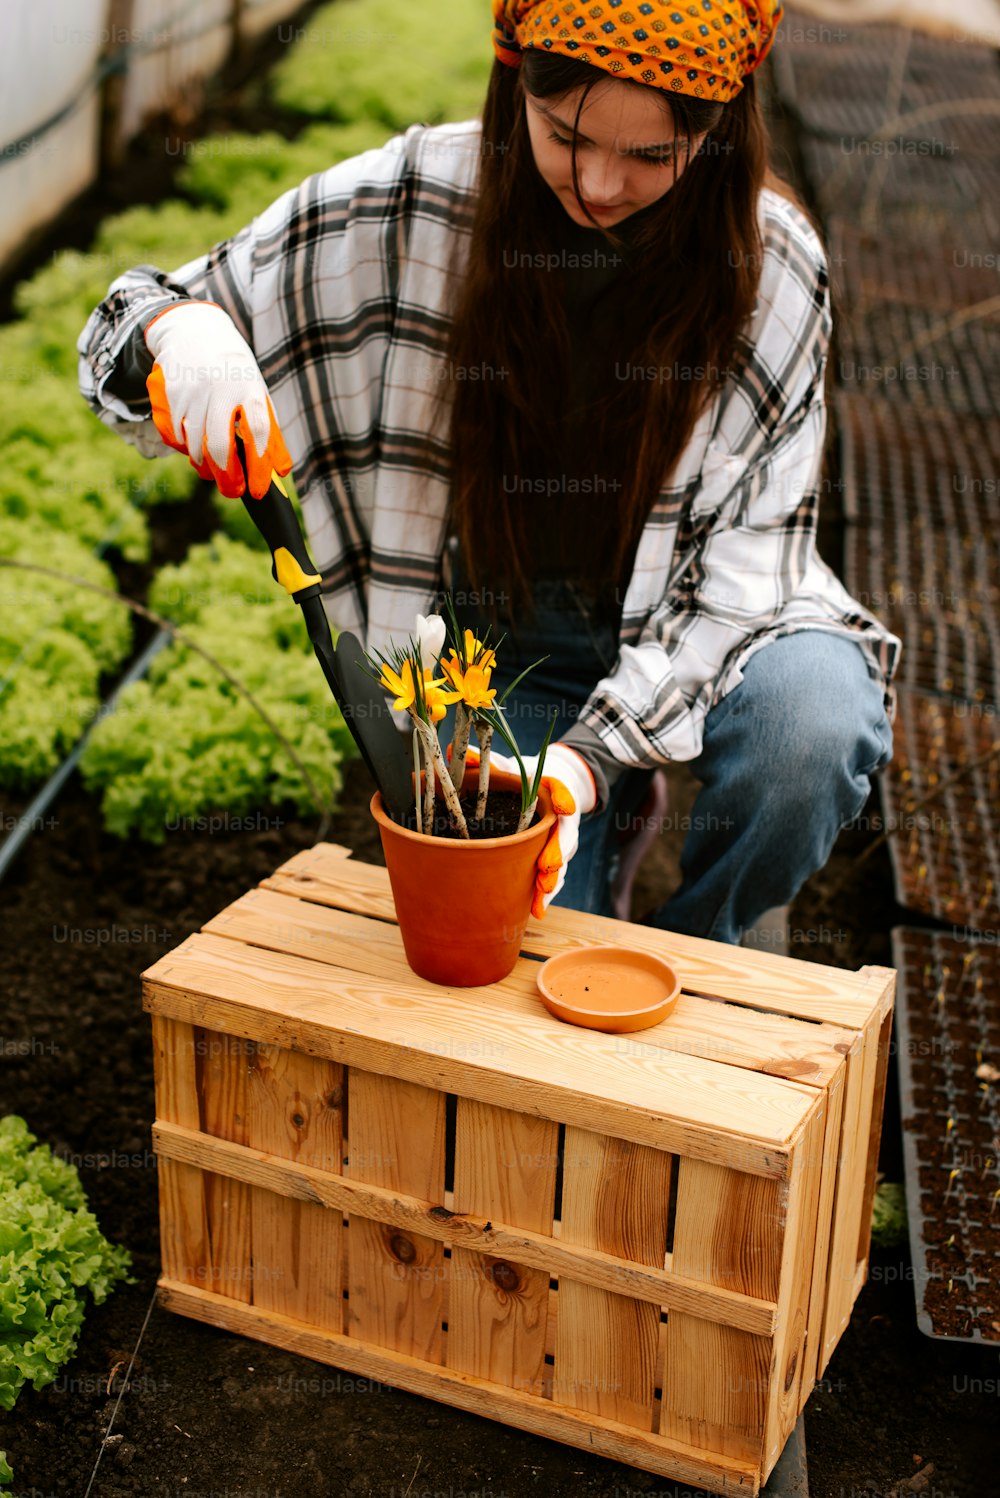 a woman in plaid shirt holding a potted plant